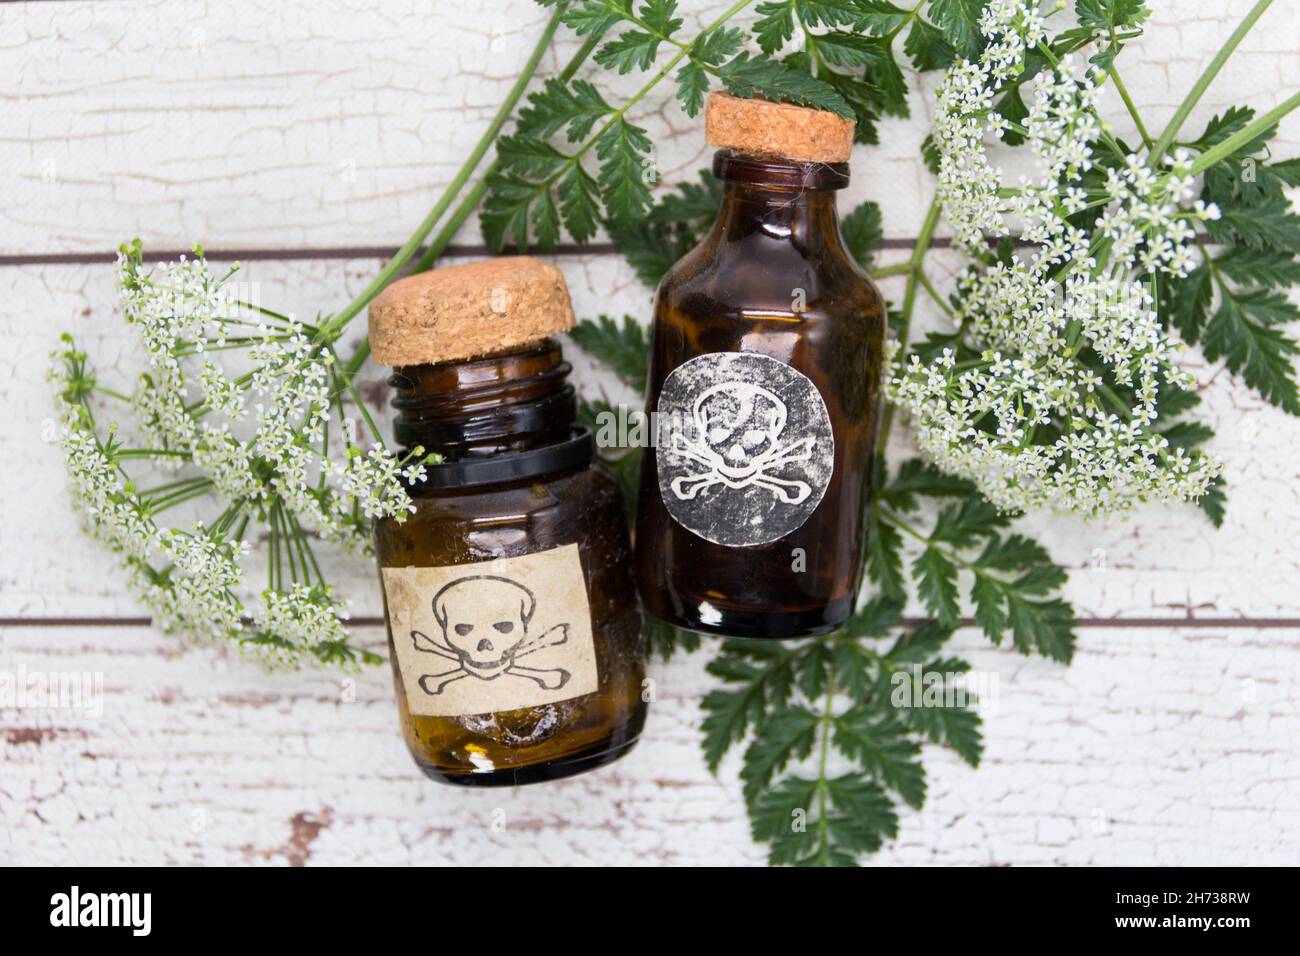 Hemlock flower bouquet with a vial of poison Stock Photo